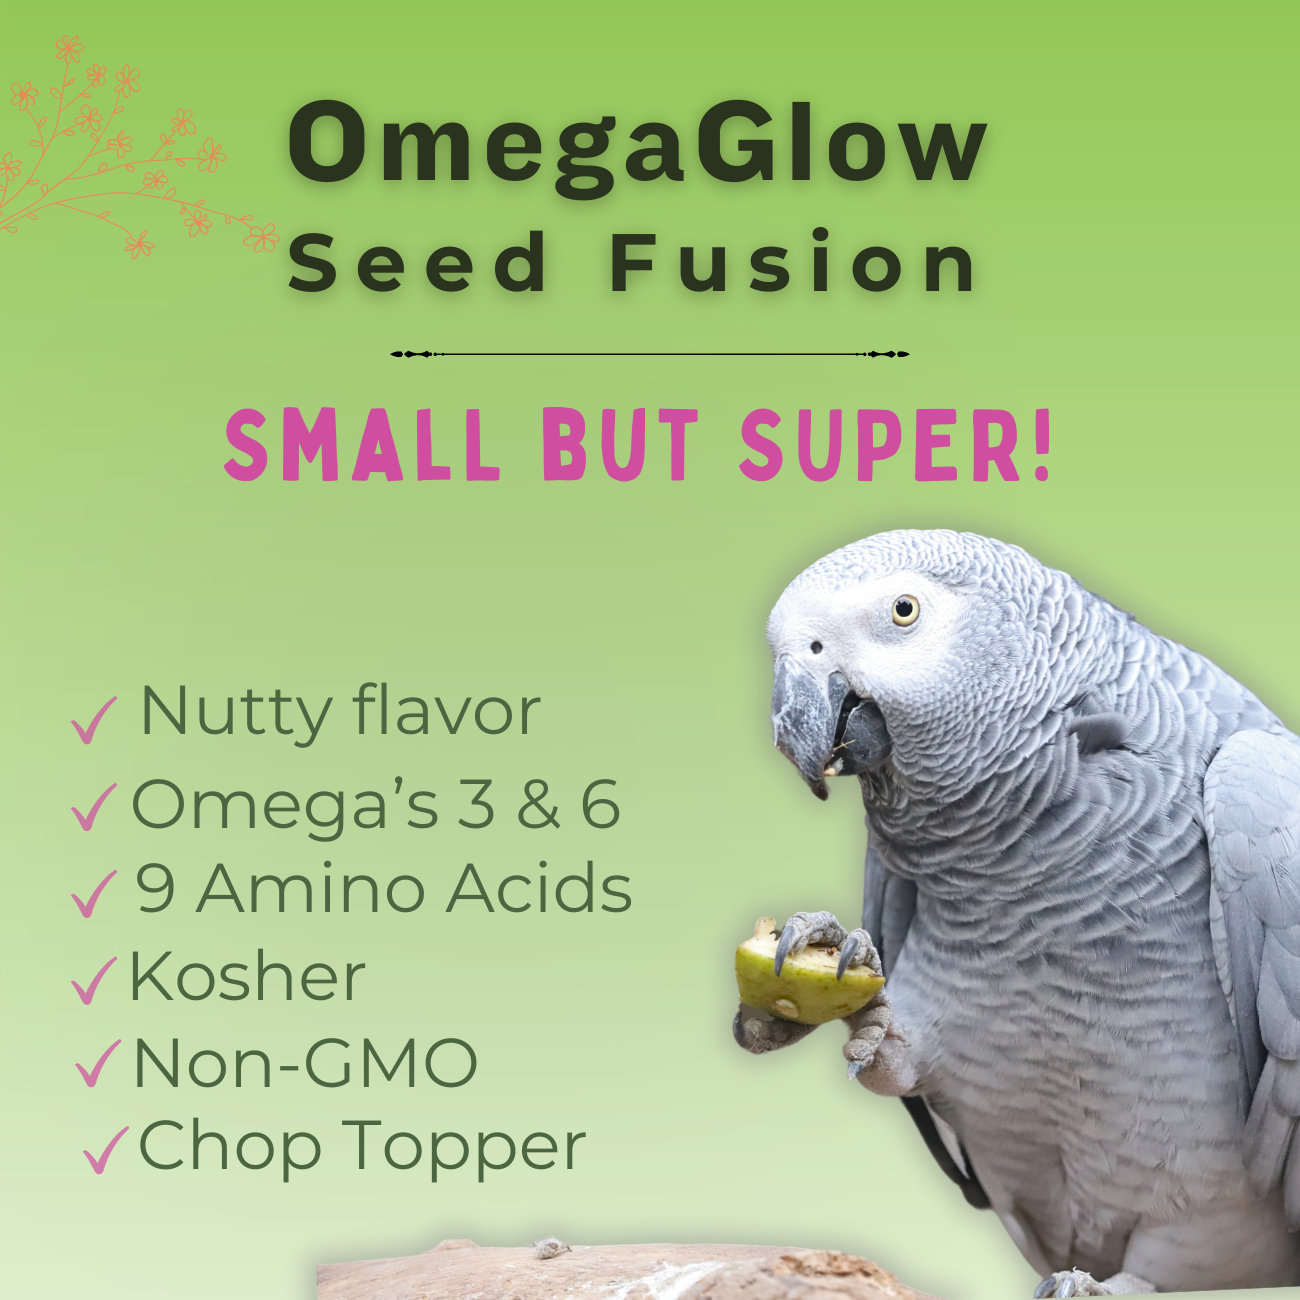 OmegaGlow Seed Fusion